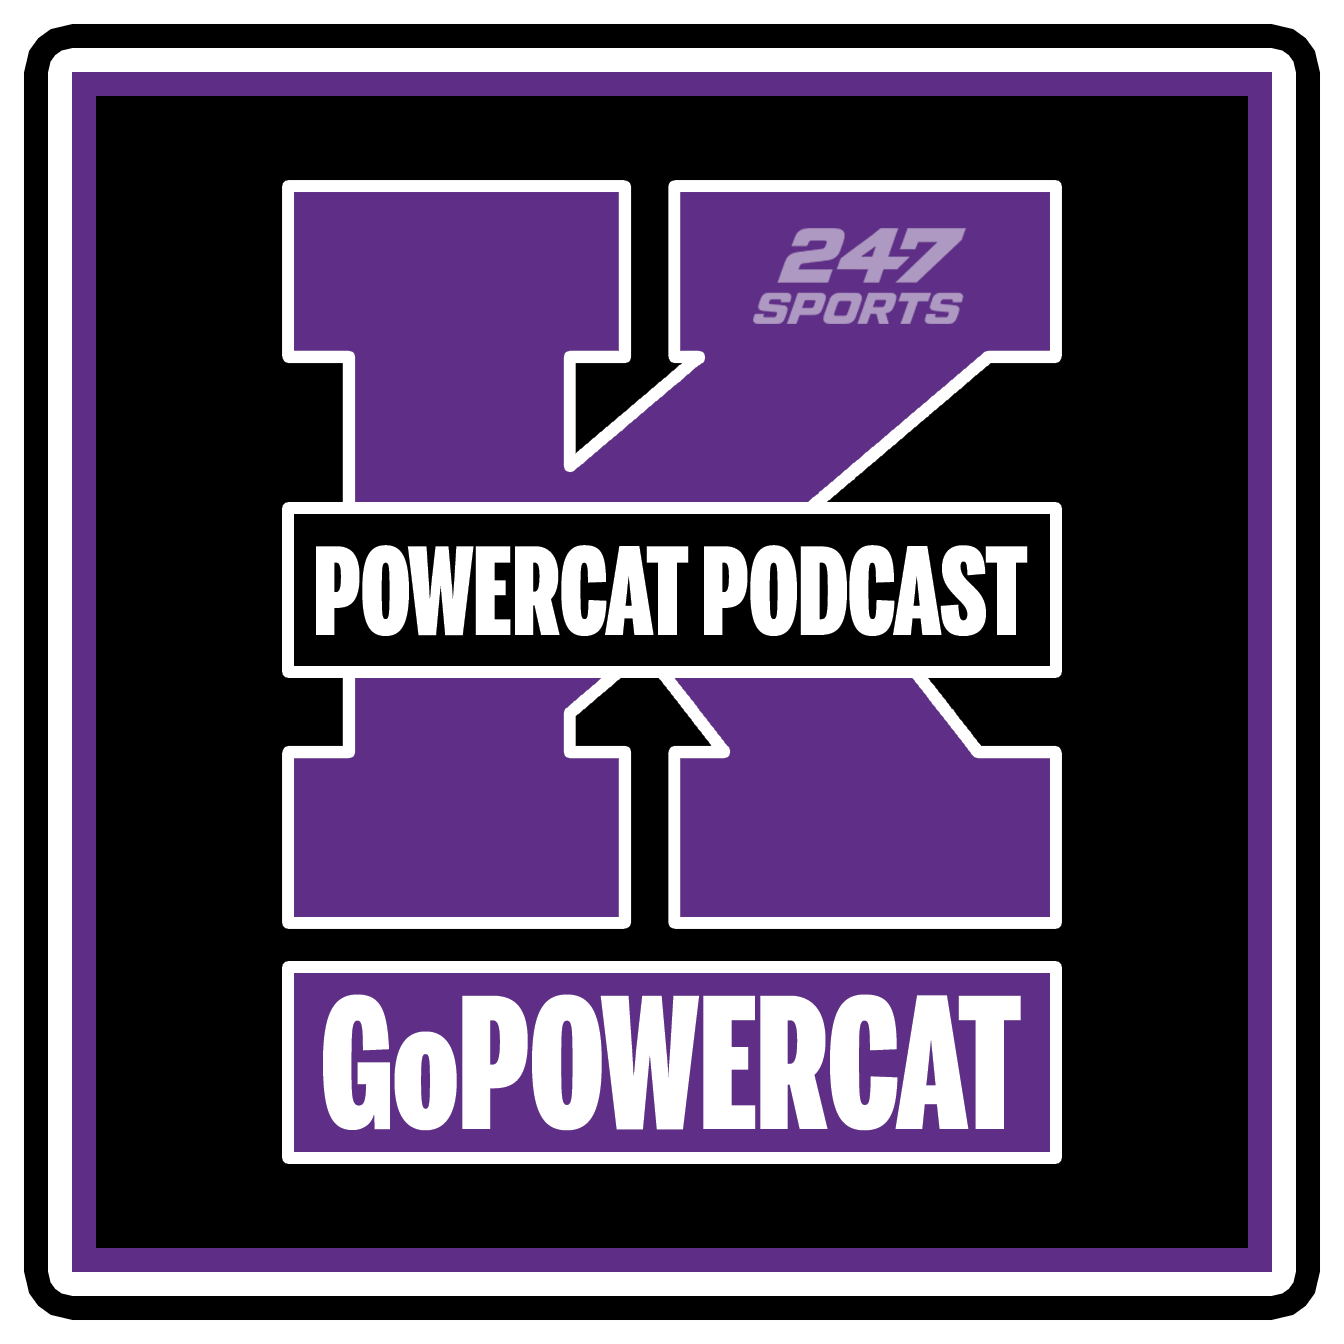 Powercat Podcast | The prodigal son returns, and portal problems for basketball